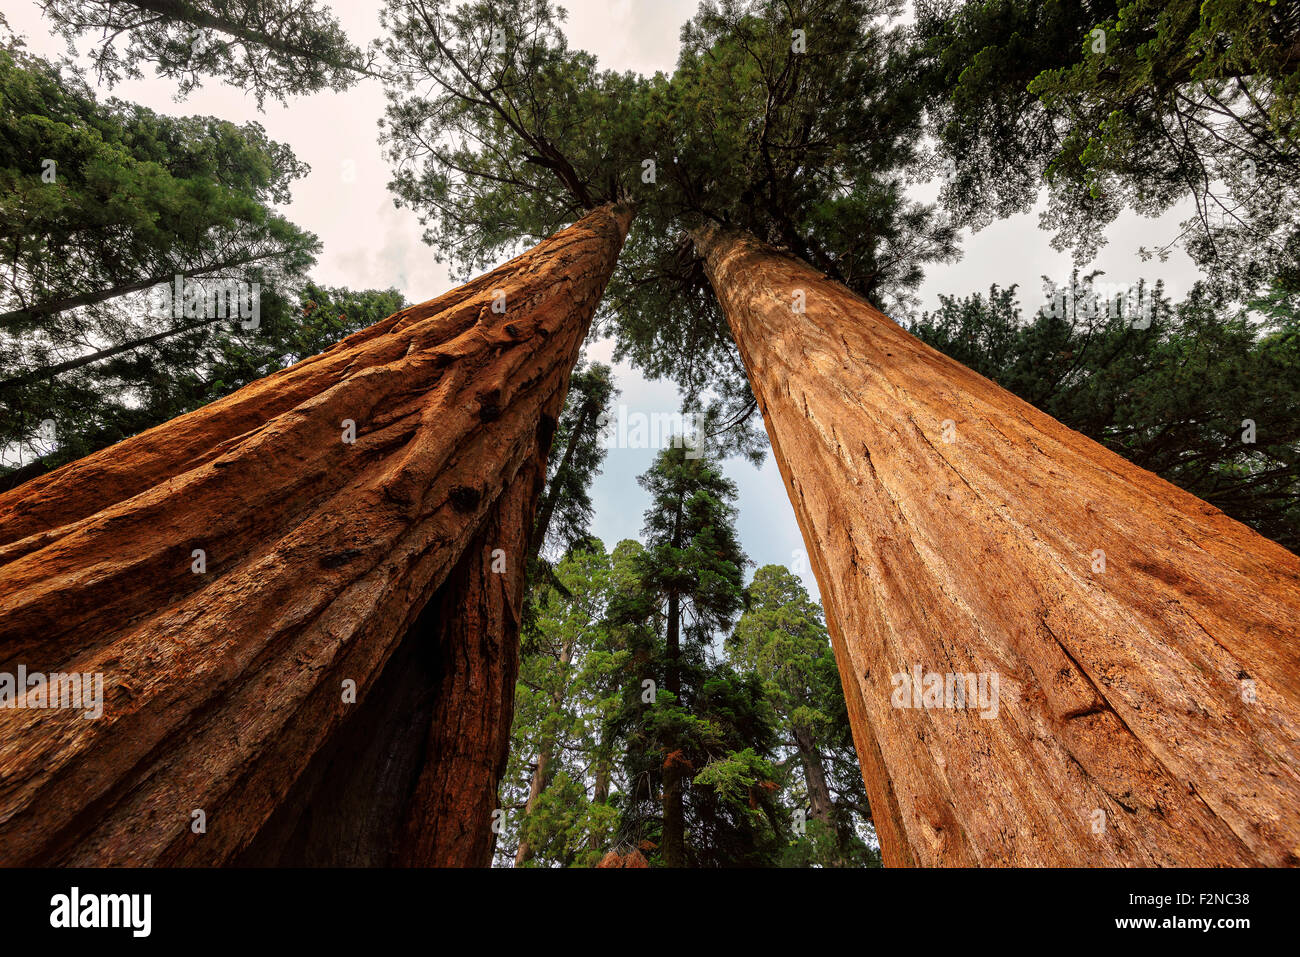 The famous big sequoia trees are standing in Sequoia National Park, Giant village area , big famous sequoia trees Stock Photo